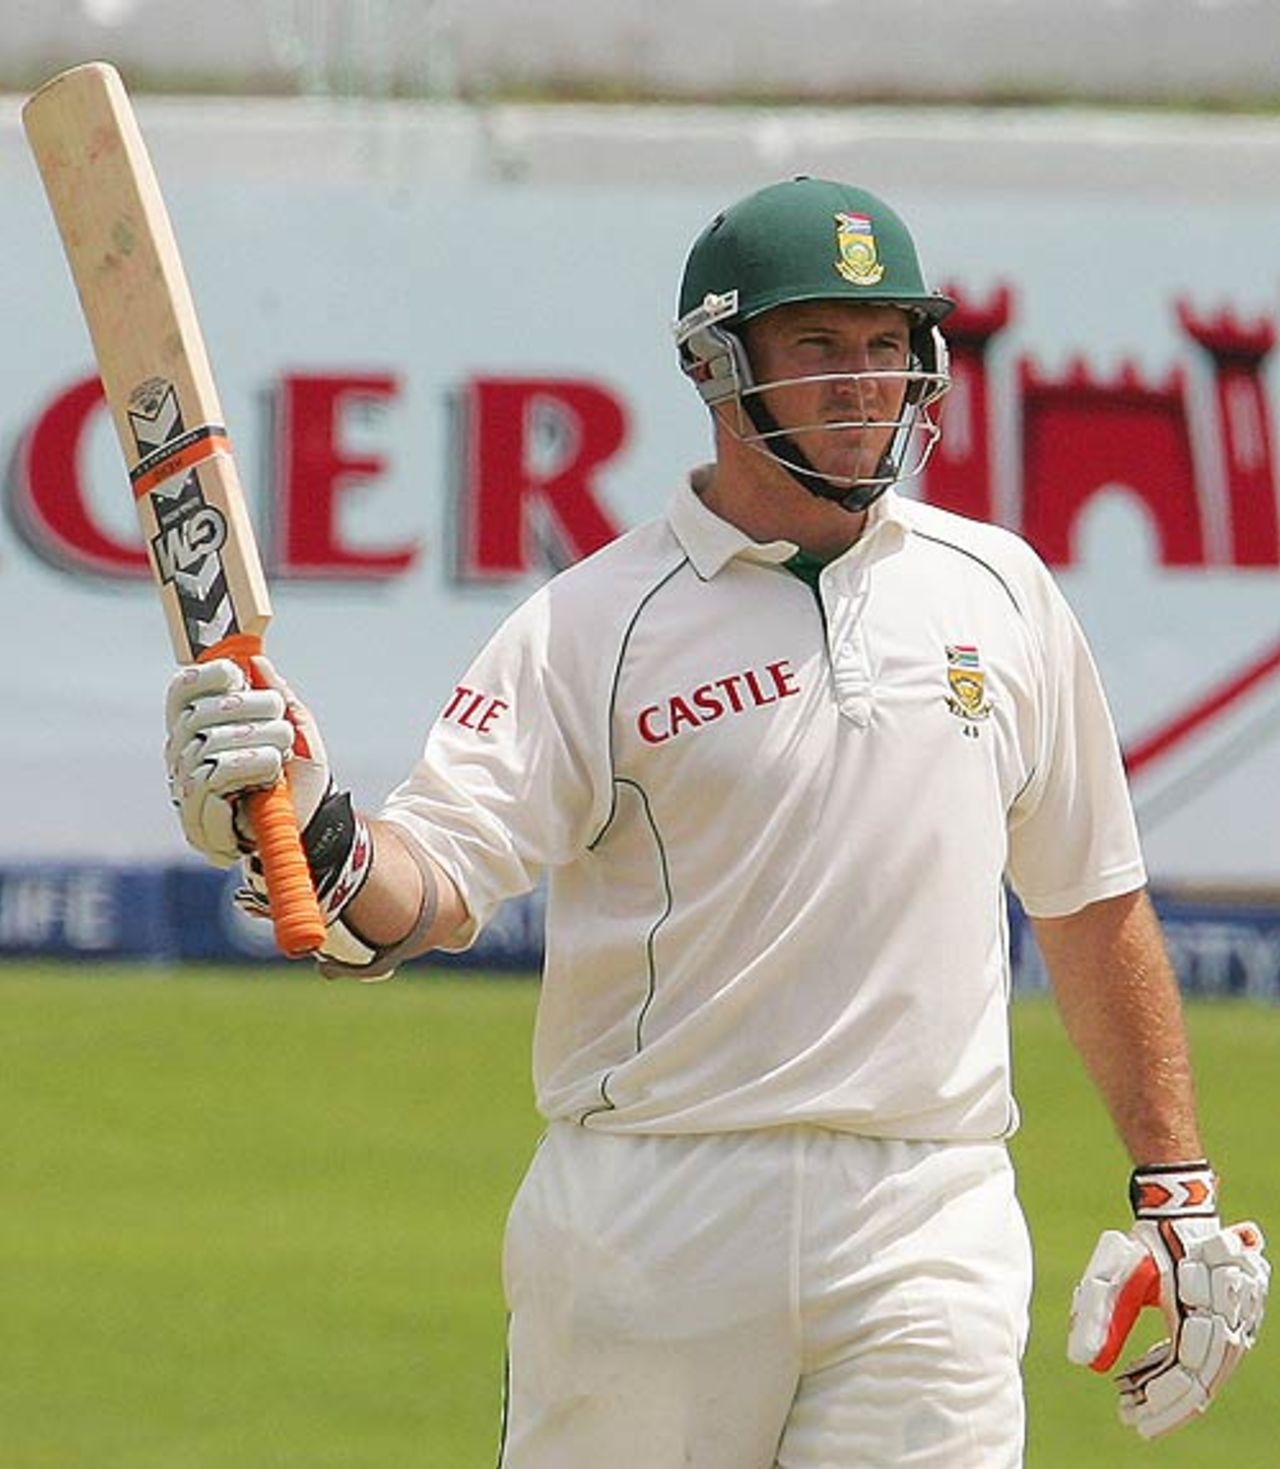 Graeme Smith celebrates his fifty, South Africa v India, 2nd Test, Durban, 4th day, December 29, 2006